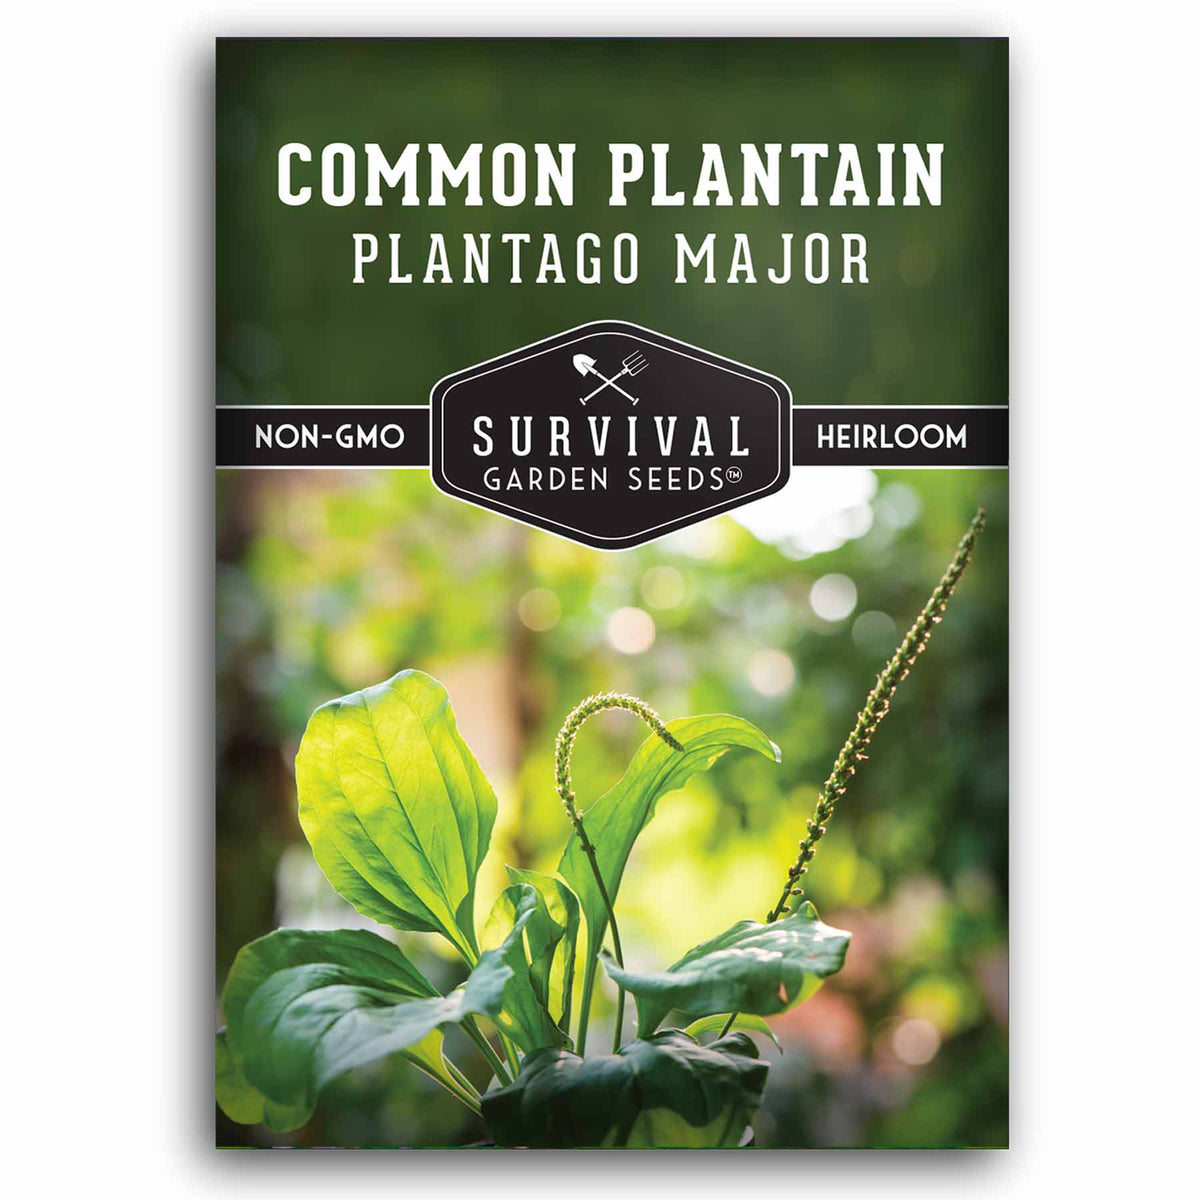 1 packet of Common Plantain seeds